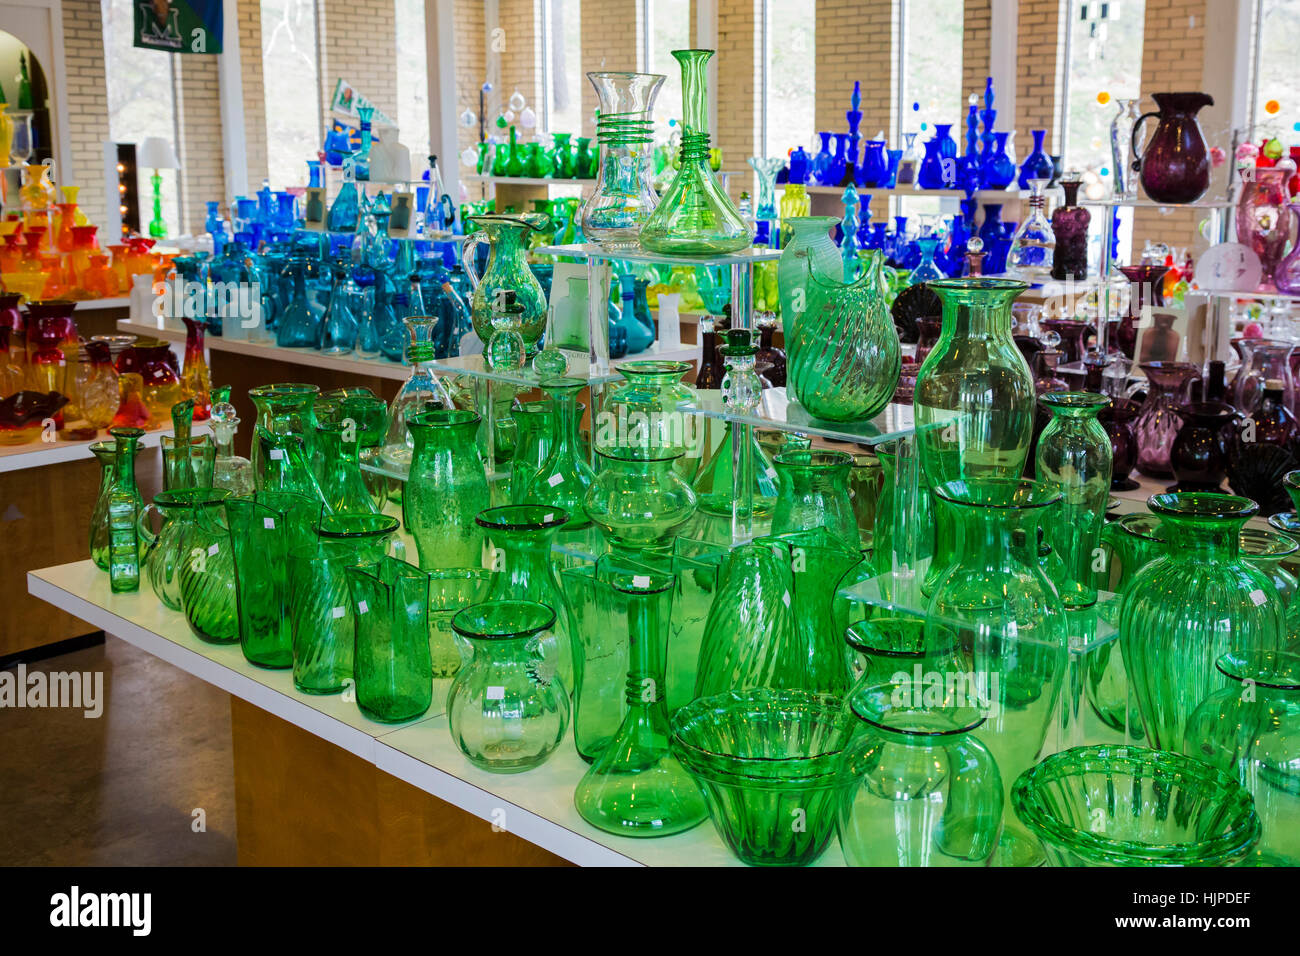 Milton, West Virginia - Hand-blown glassware on sale at the visitor center of the Blenko Glass Company. Stock Photo